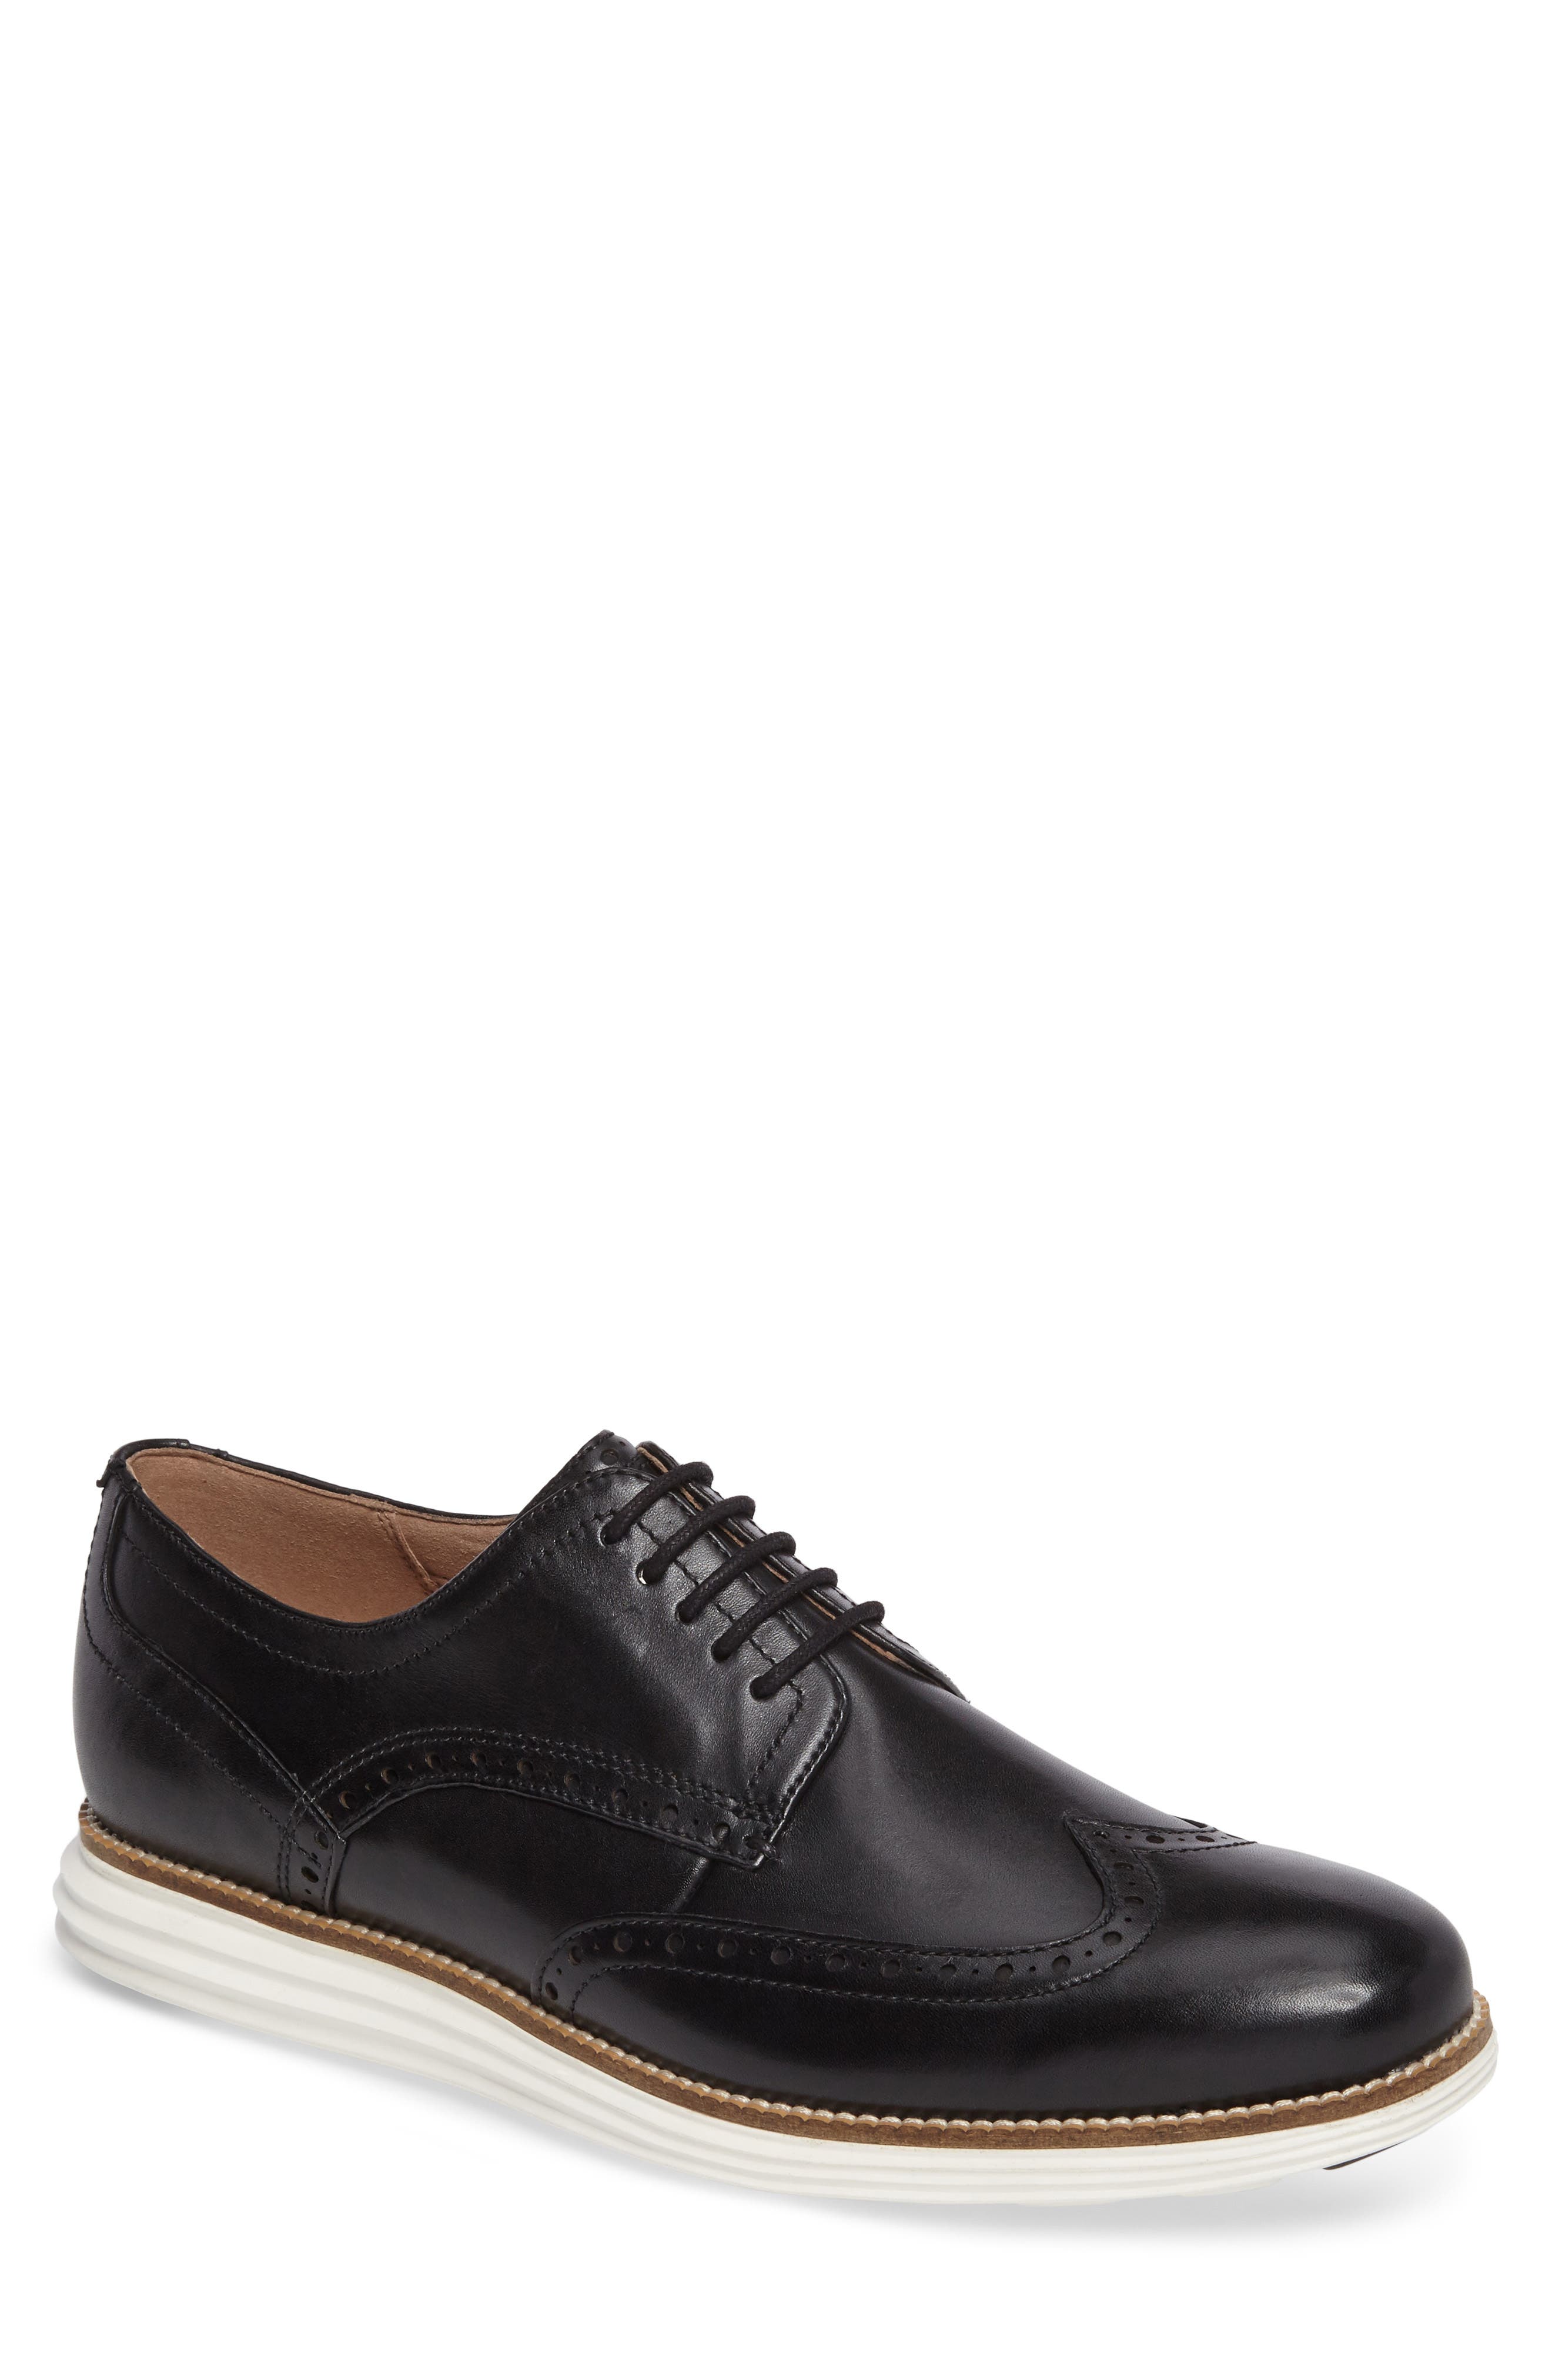 lord and taylor cole haan mens shoes